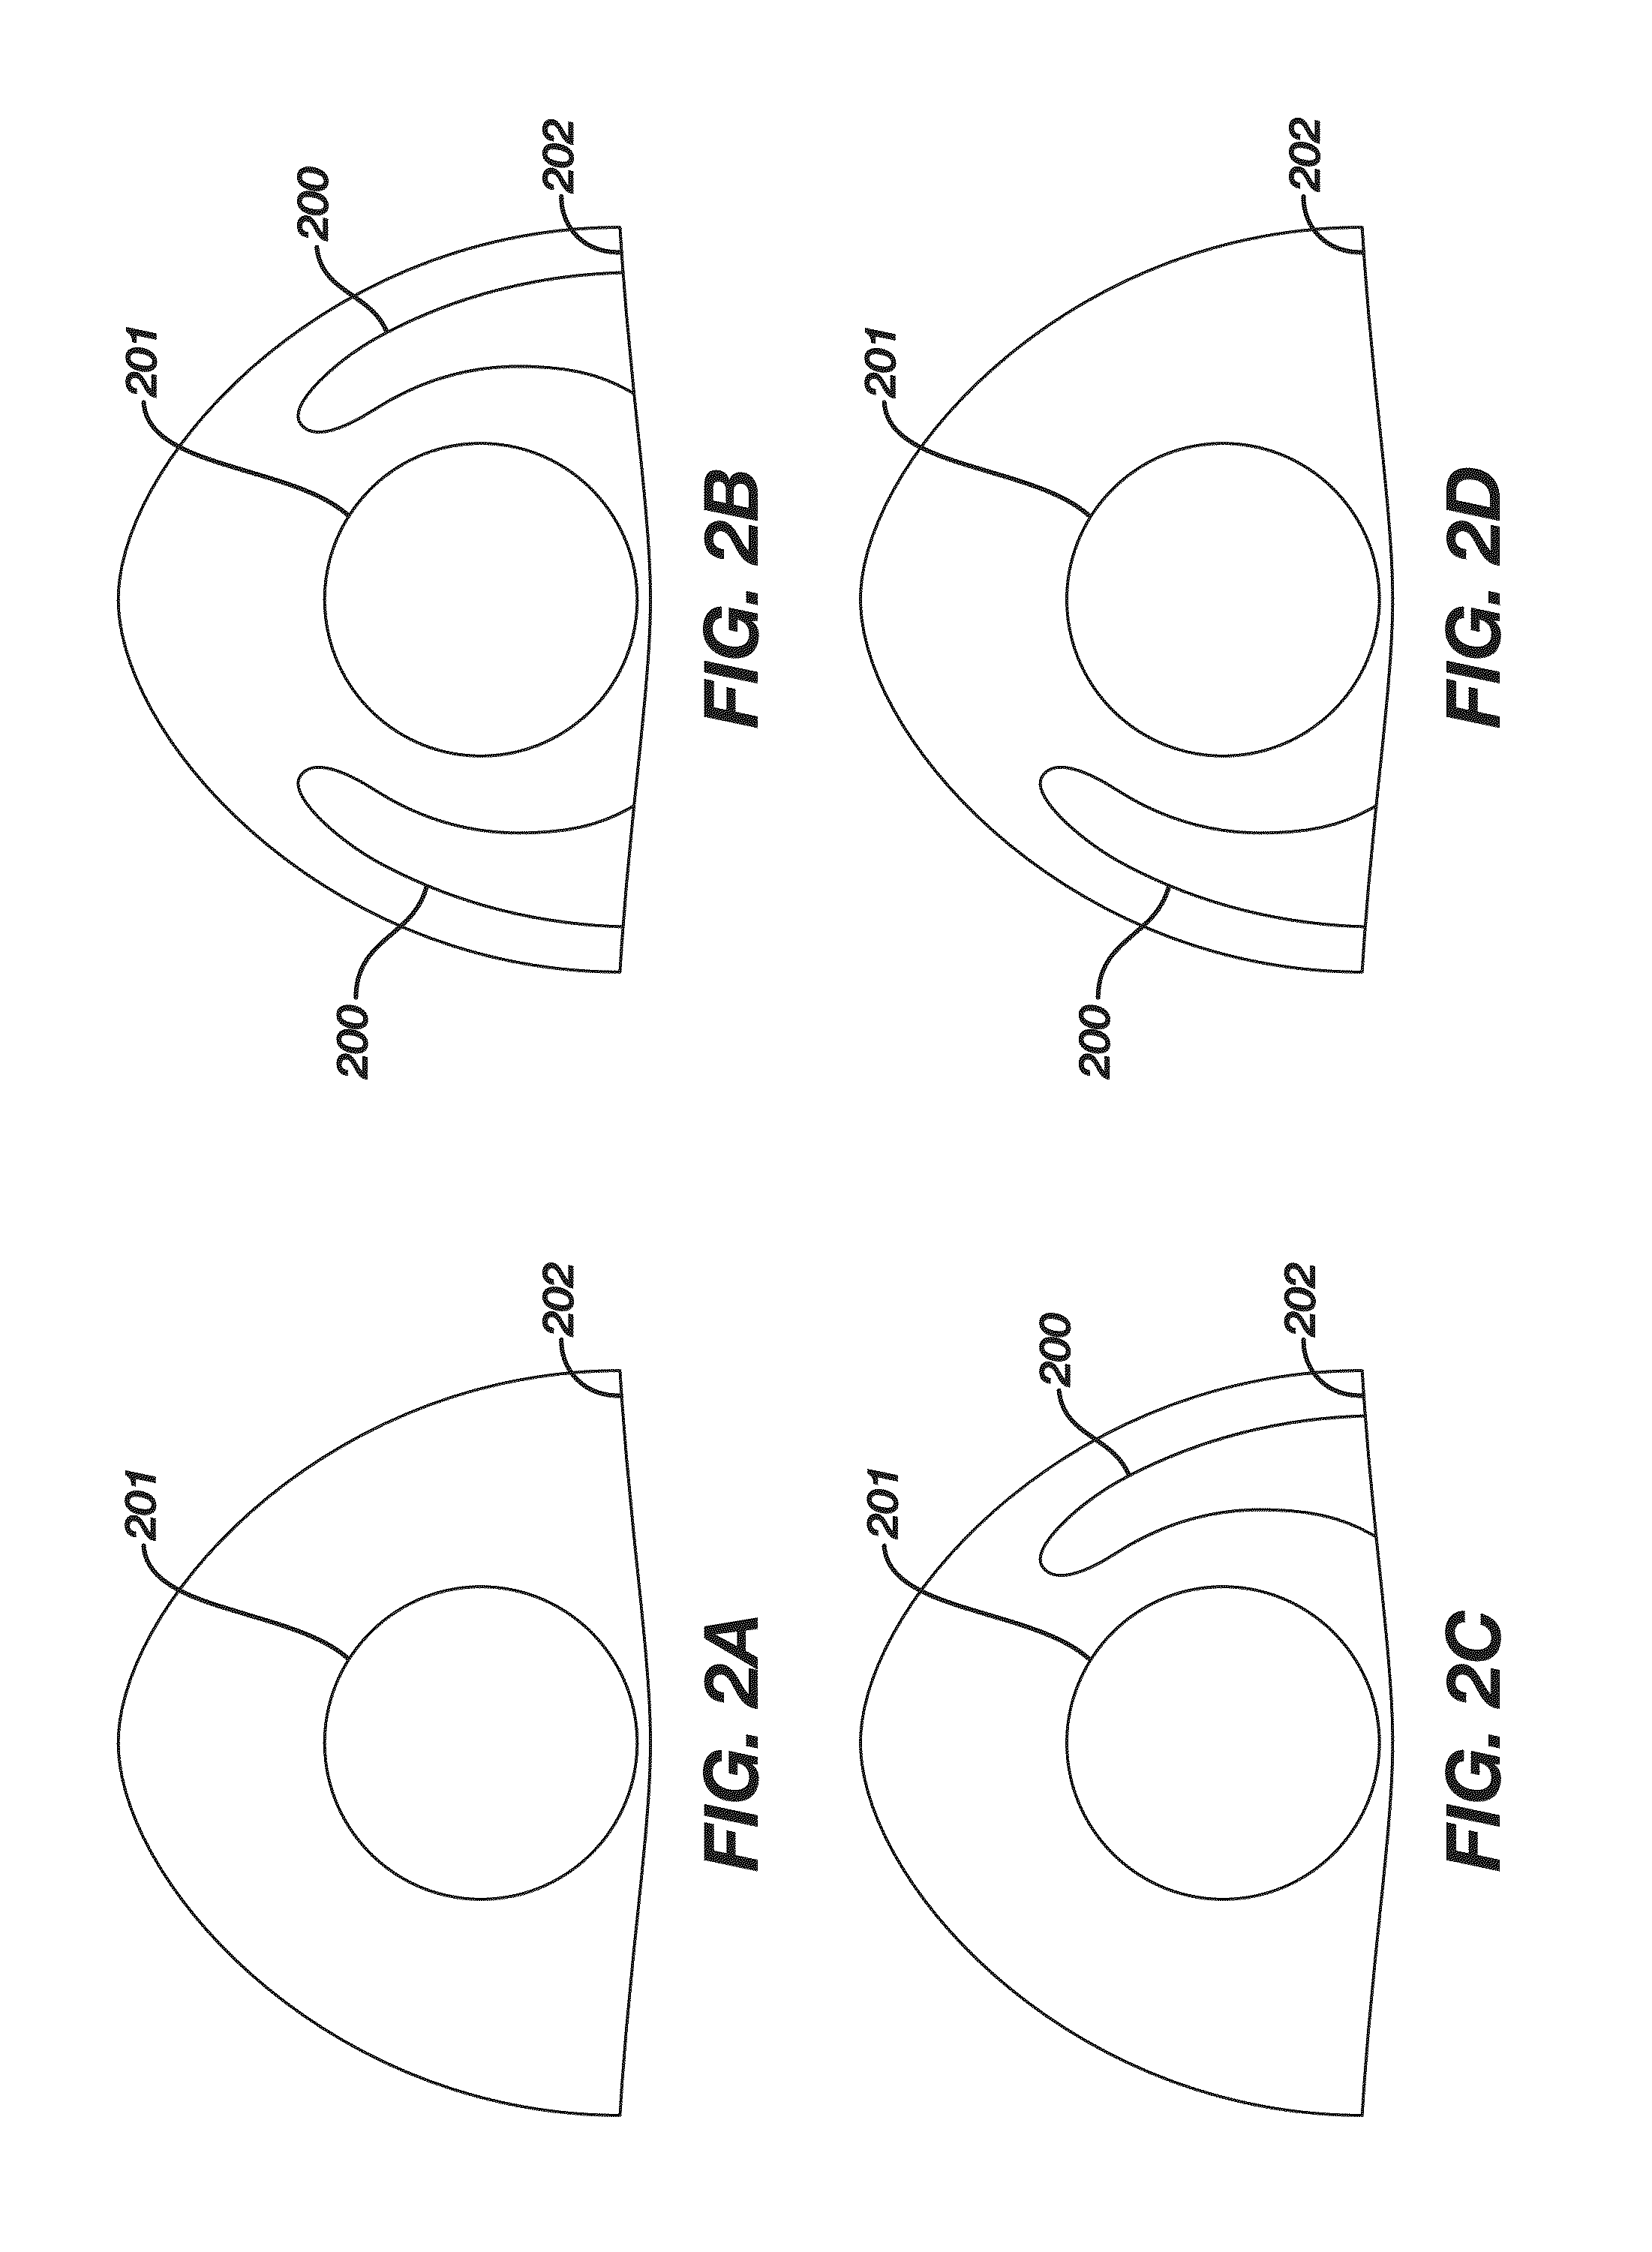 Method and apparatus of forming a translating multifocal contact lens having a lower-lid contact surface